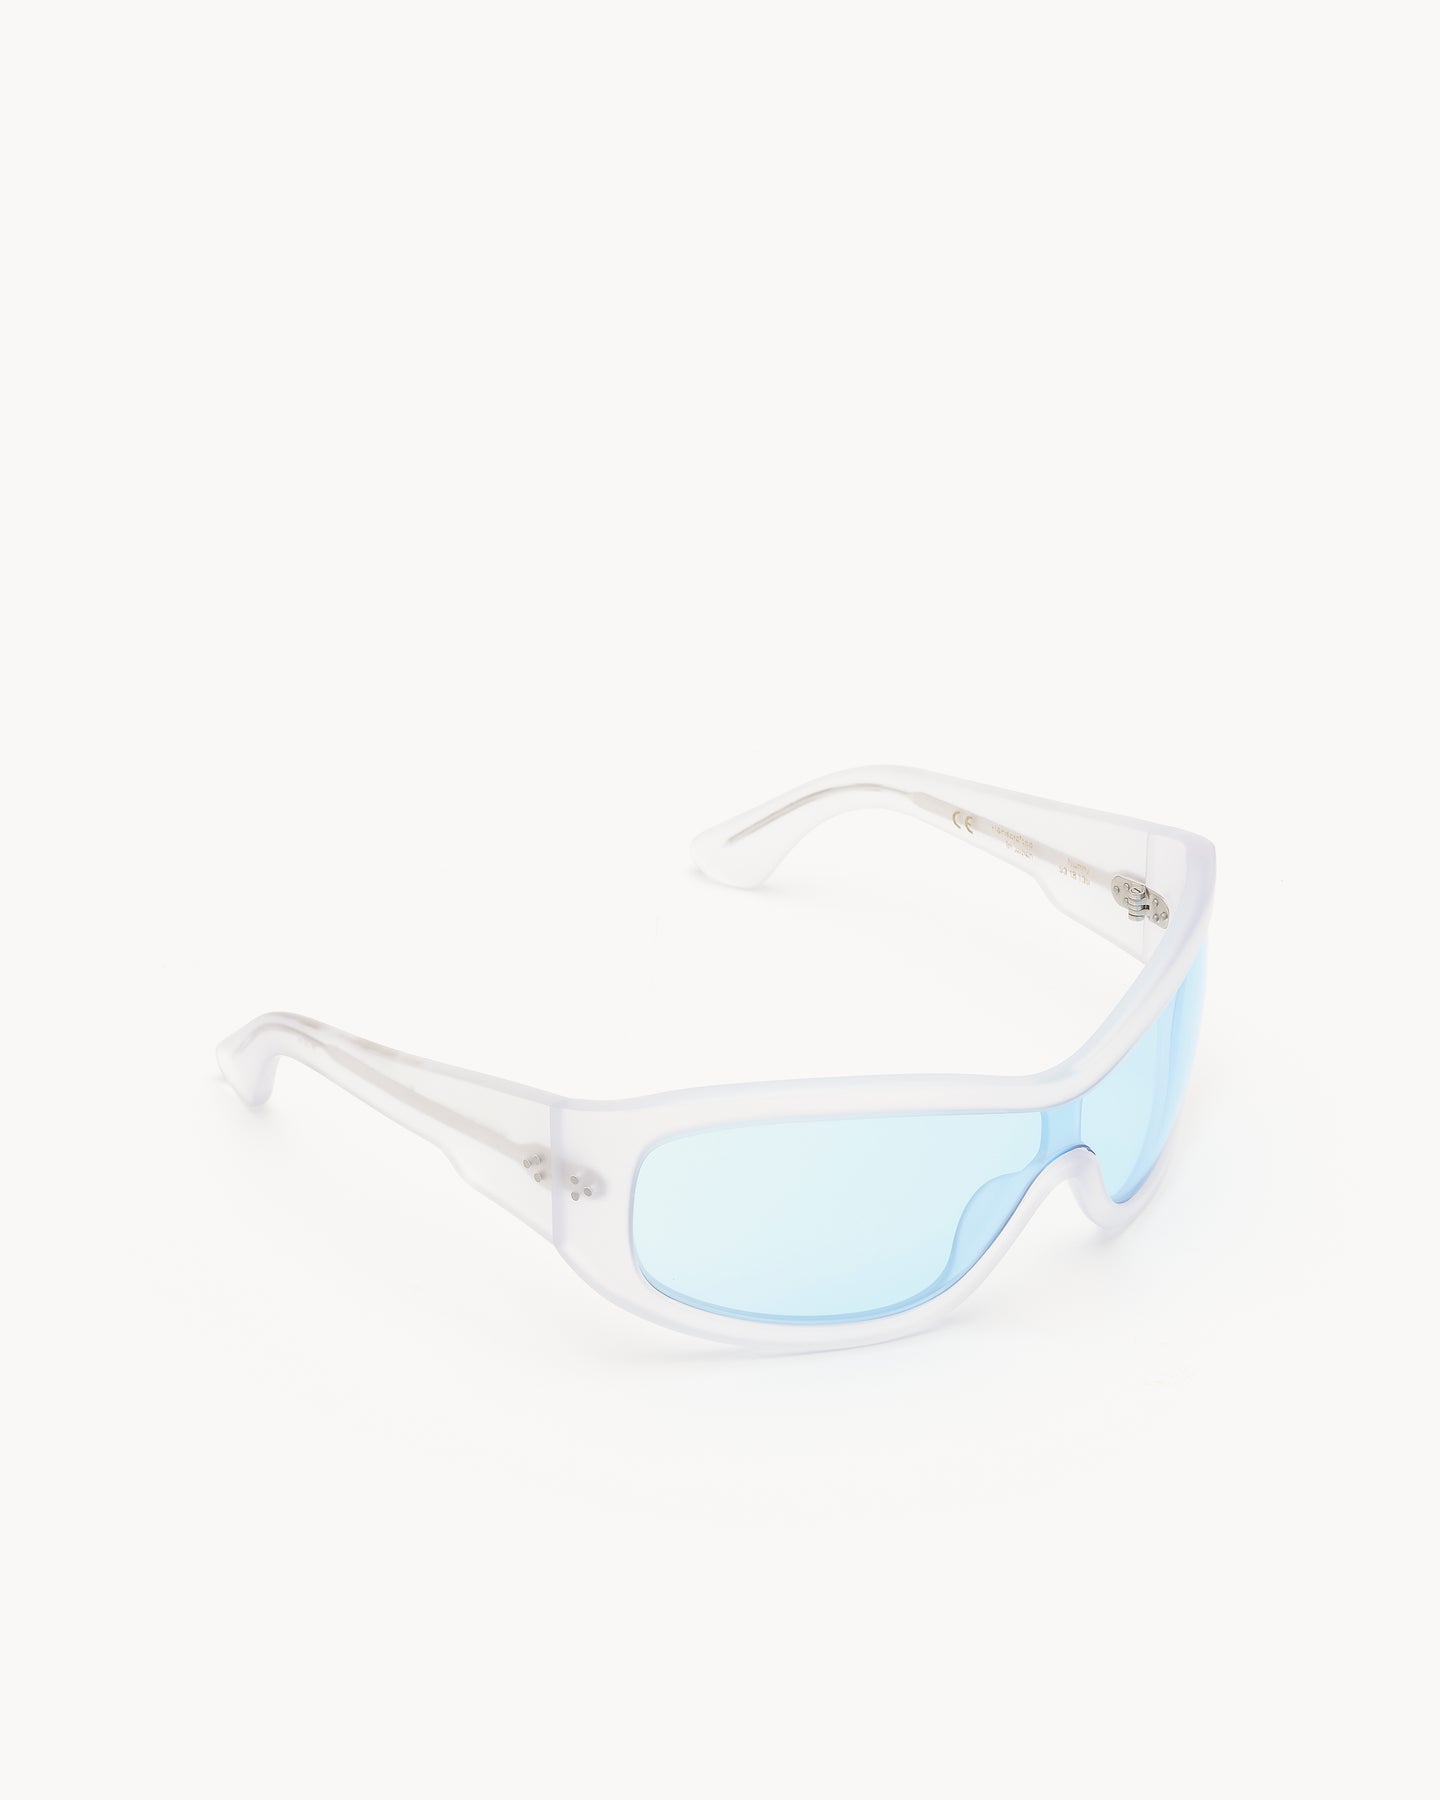 Port Tanger Nunny Sunglasses in Frosty Blue Acetate and Rif Blue Lenses 2